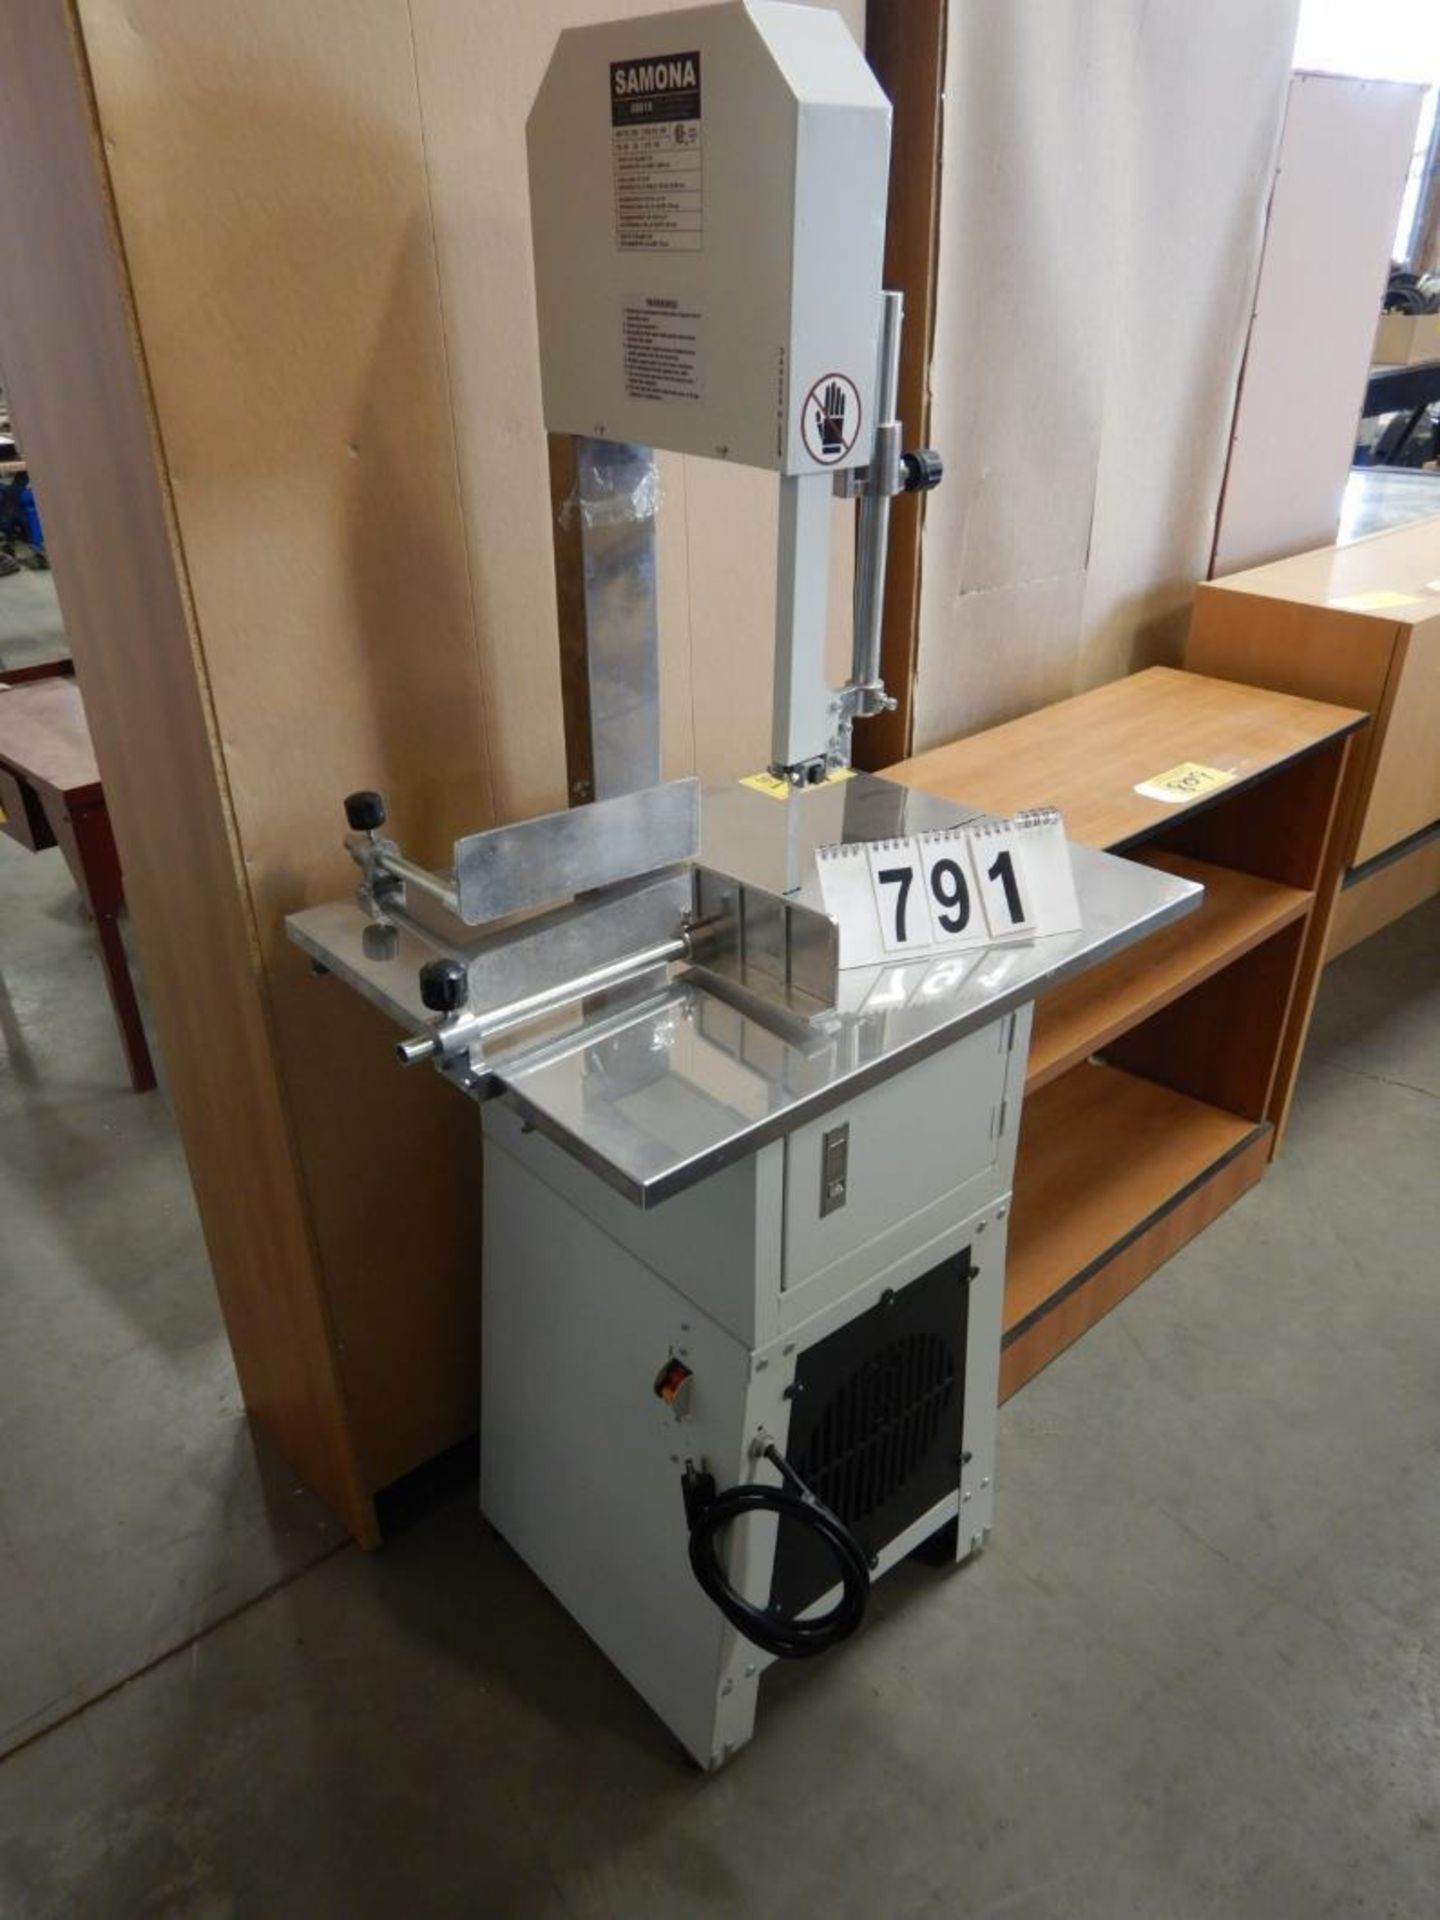 SAMONA 10" MEAT CUTTING BAND SAW W/ 3/4HP MOTOR, 110V, 18"X24" TABLE, NEW, NEVER BEEN USED. - Image 2 of 3